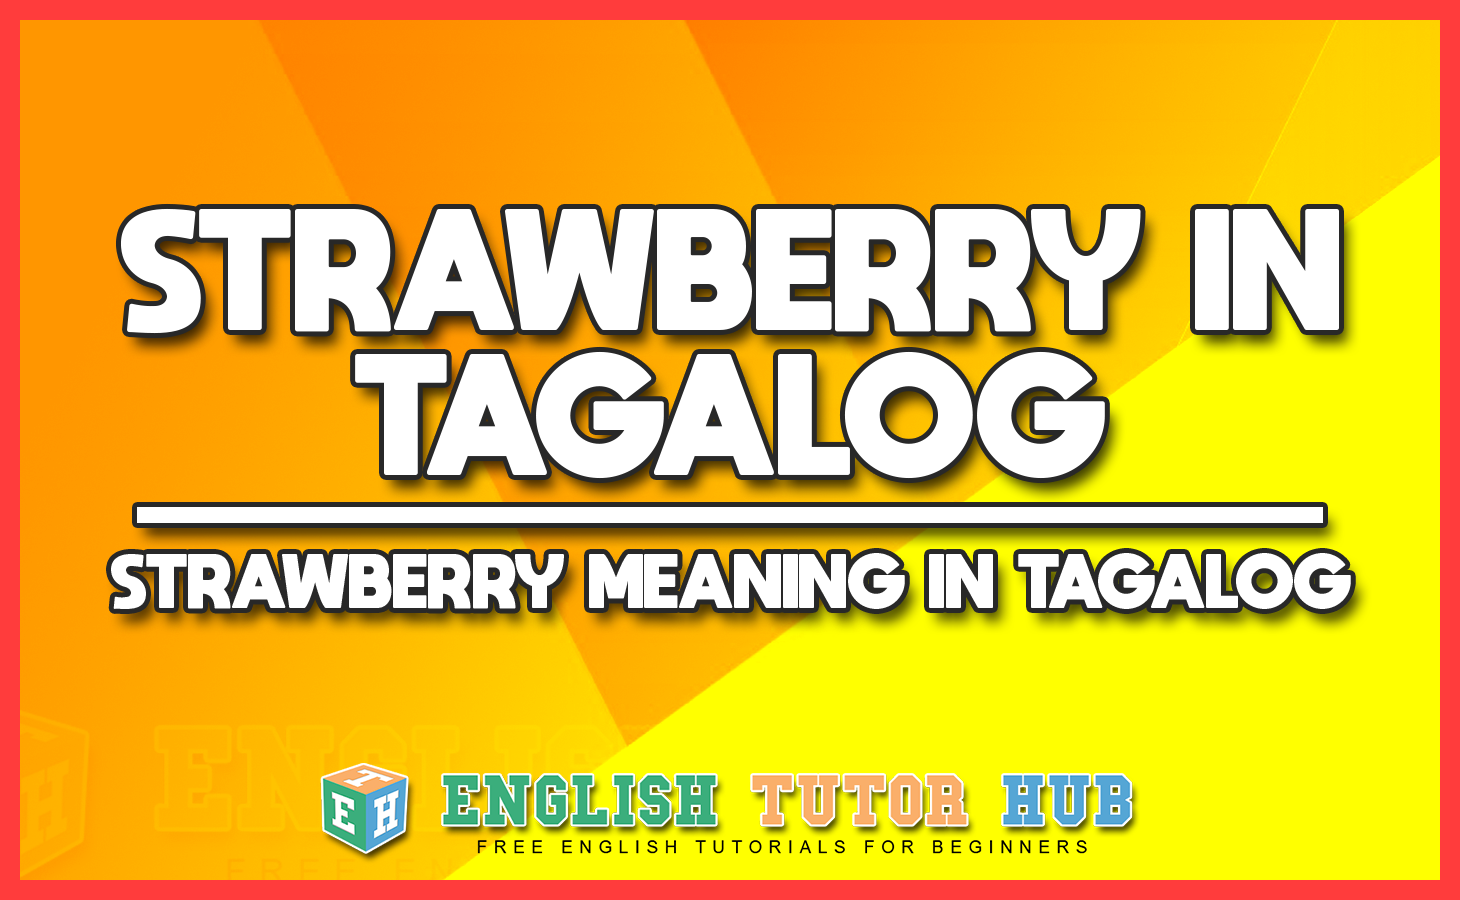 Strawberry in Tagalog - Strawberry Meaning in Tagalog